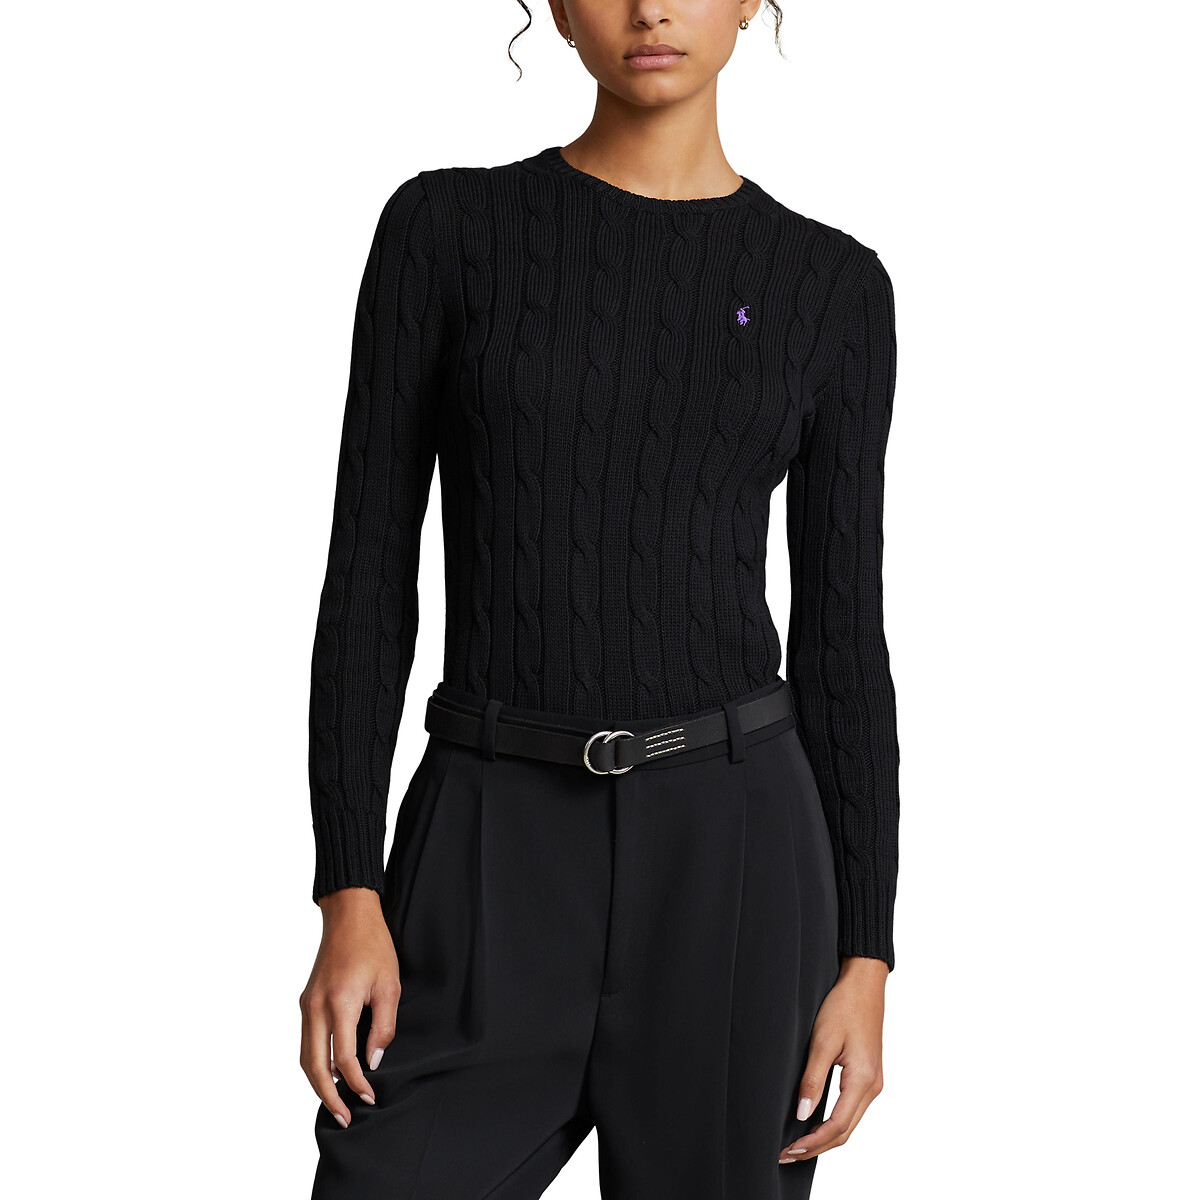 Julianna Cotton Jumper in Cable Knit with Crew Neck